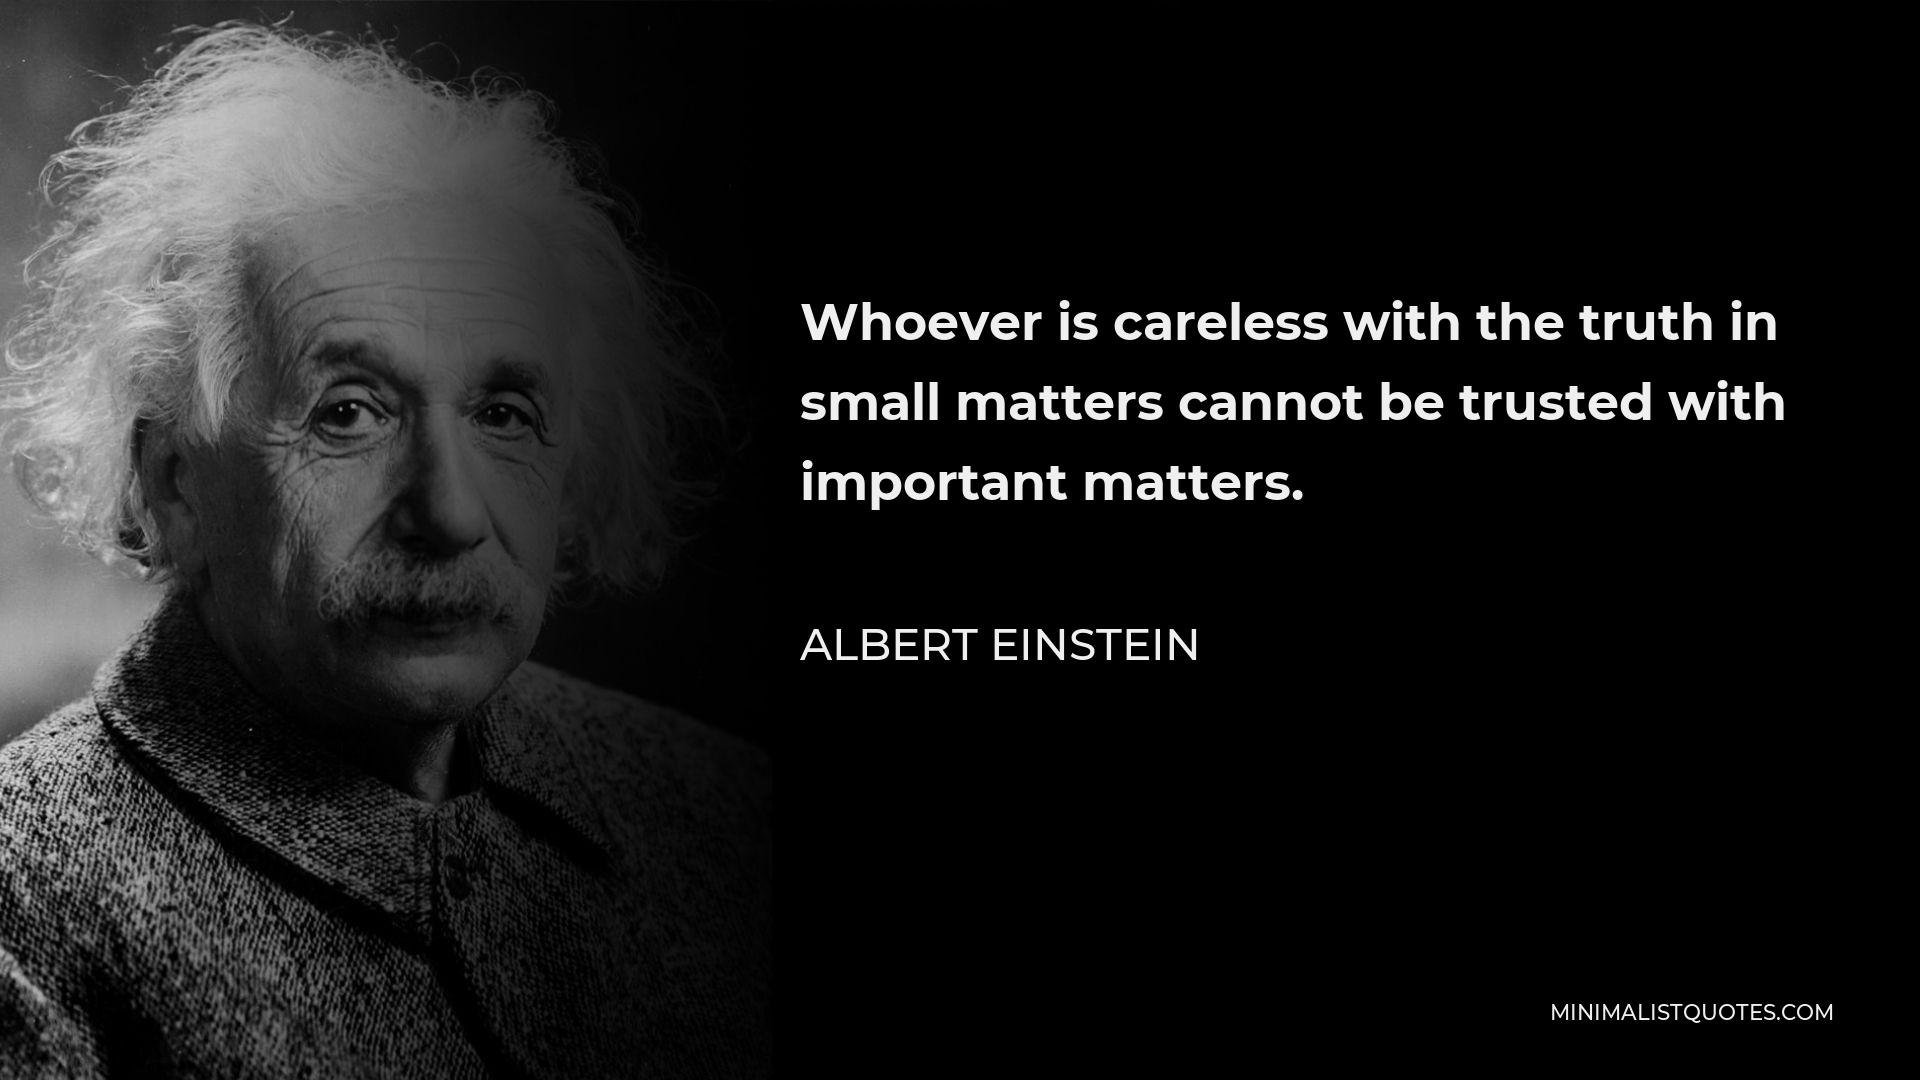 Albert Einstein Quote - Whoever is careless with the truth in small matters cannot be trusted with important matters.